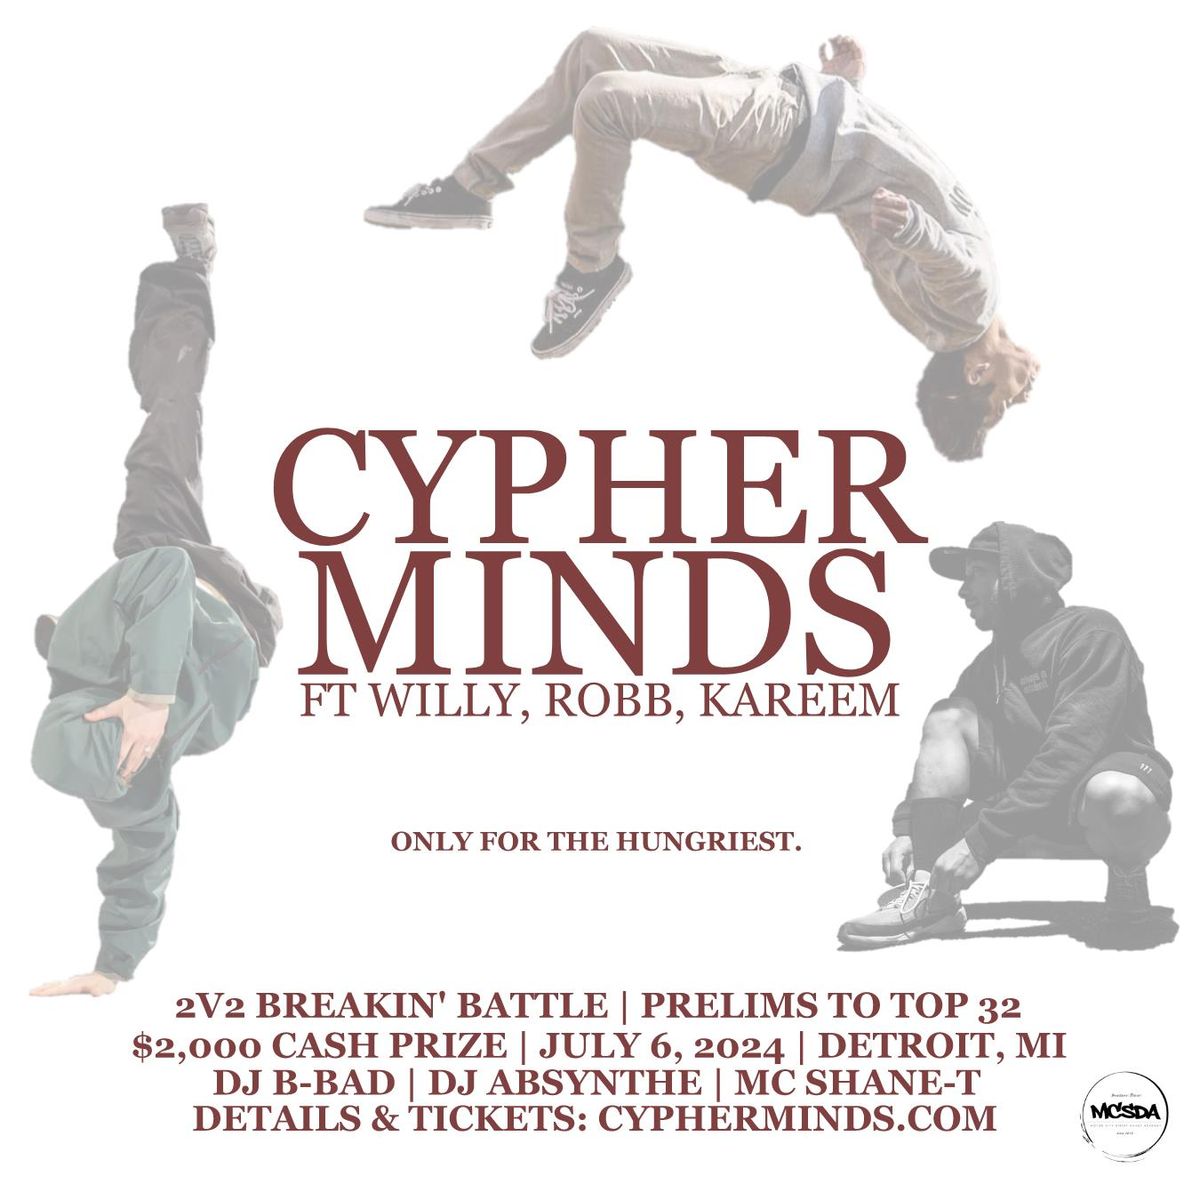 Cypher Minds ft. Willy, Robb, Kareem